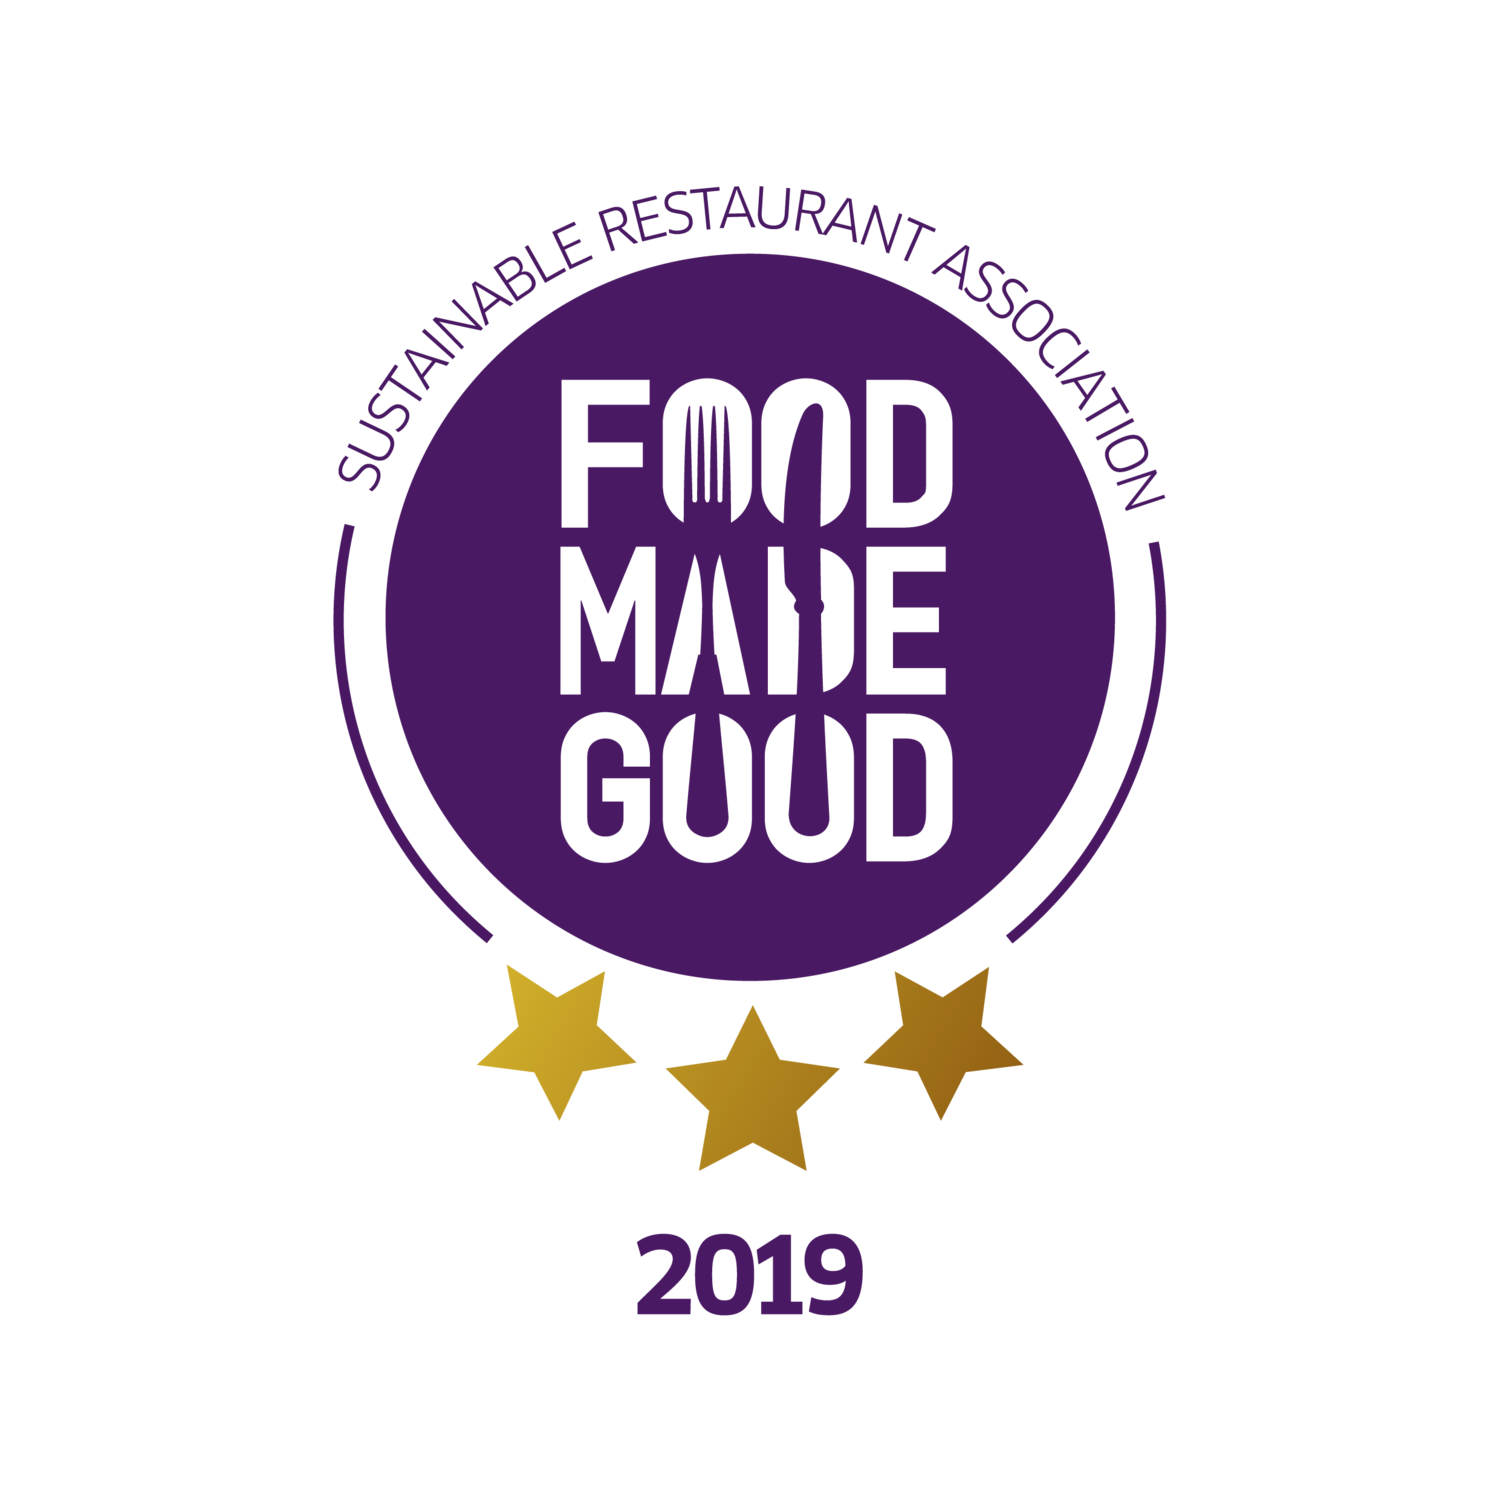 We’ve achieved 3 stars with The Sustainable Restaurant Association